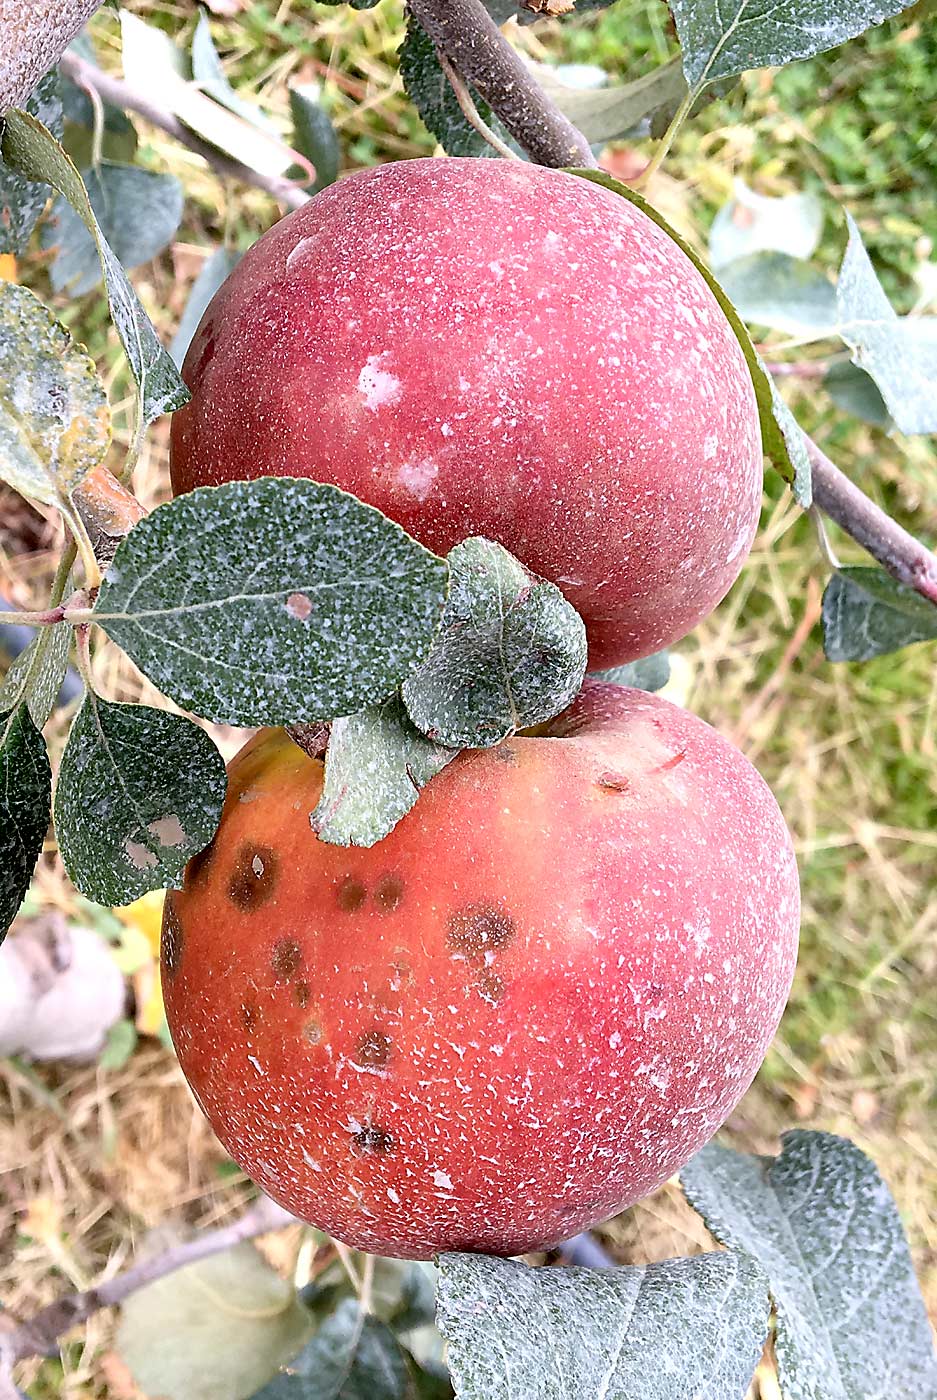 Though proving uncommon in mature orchards, the green spot disorder that can develop in WA 38 fruit seems to be influenced by tree vigor, crop load, climate conditions and nutrient levels in the fruit, similar to bitter pit in one of its parents, Honeycrisp, according to Washington State University’s Bernardita Sallato. (Courtesy Bernardita Sallato)